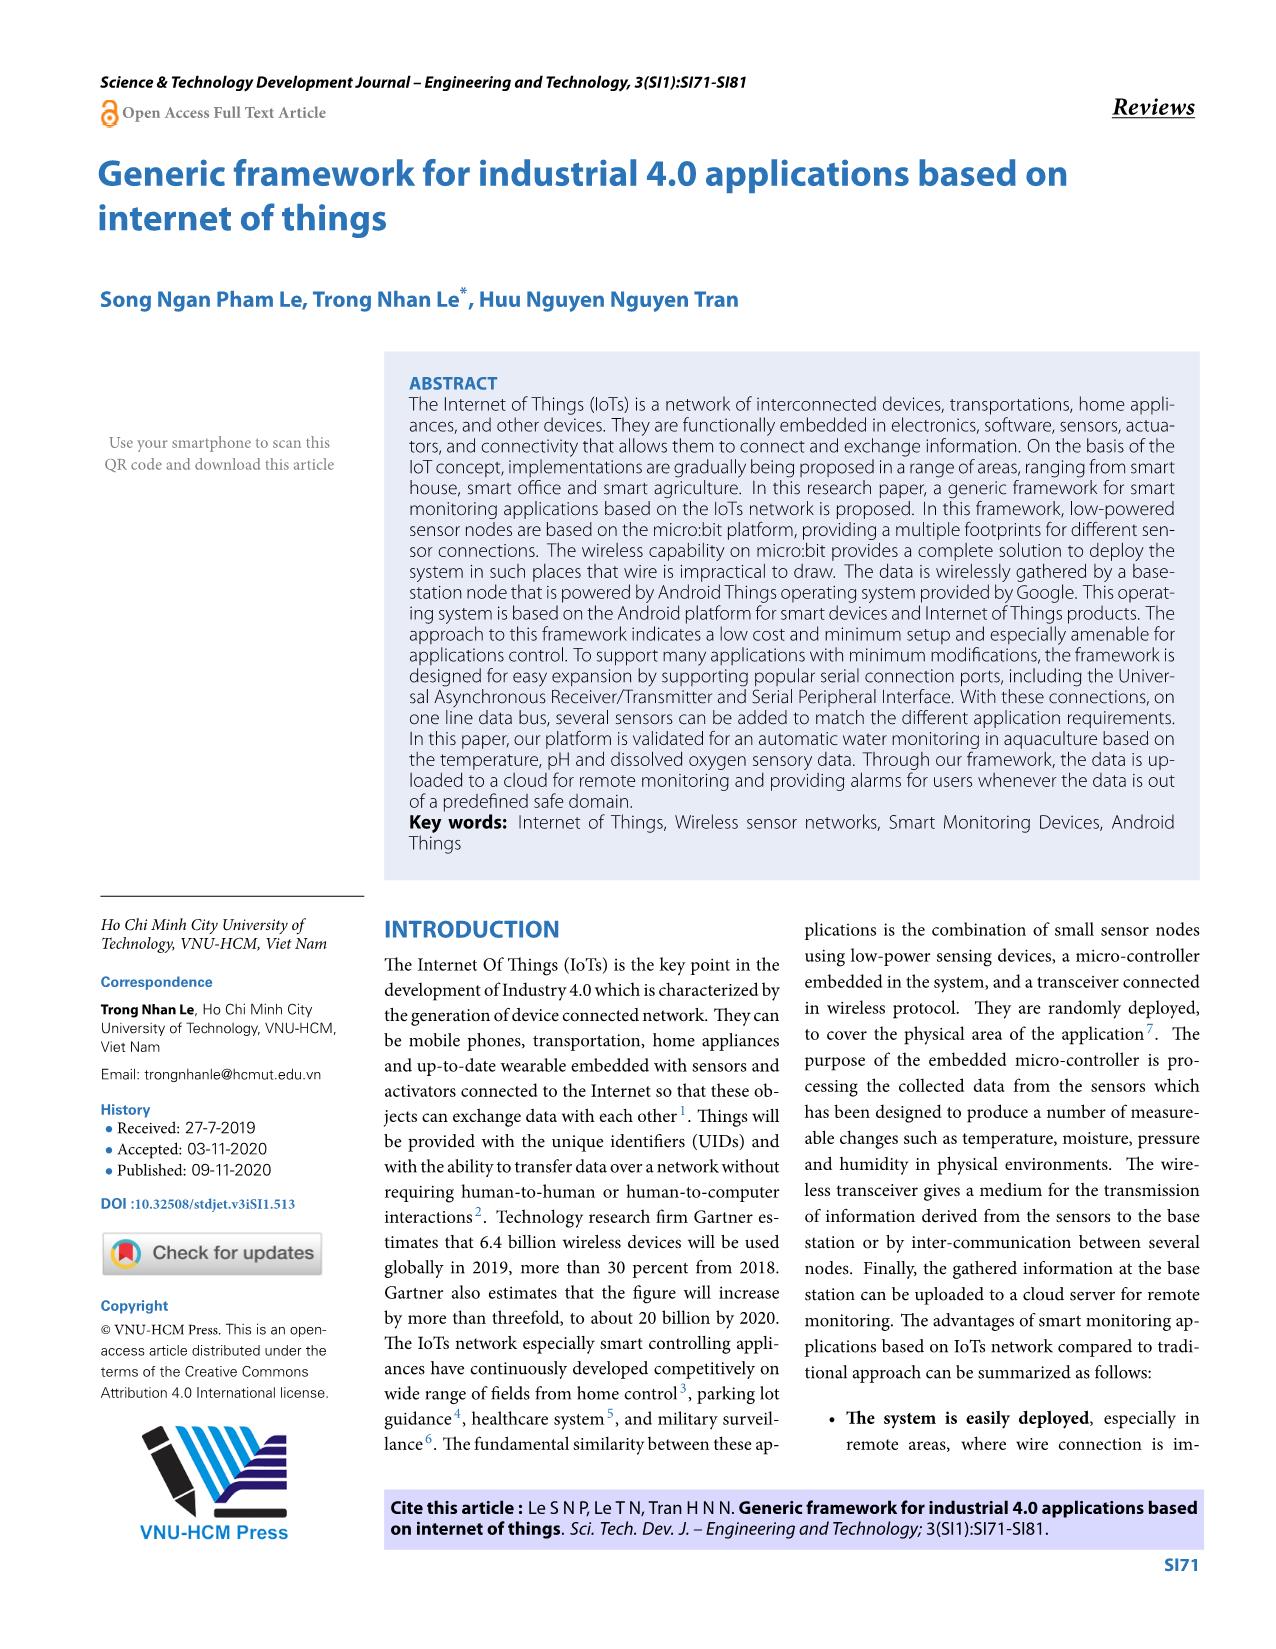 Generic framework for industrial 4.0 applications based on internet of things trang 1